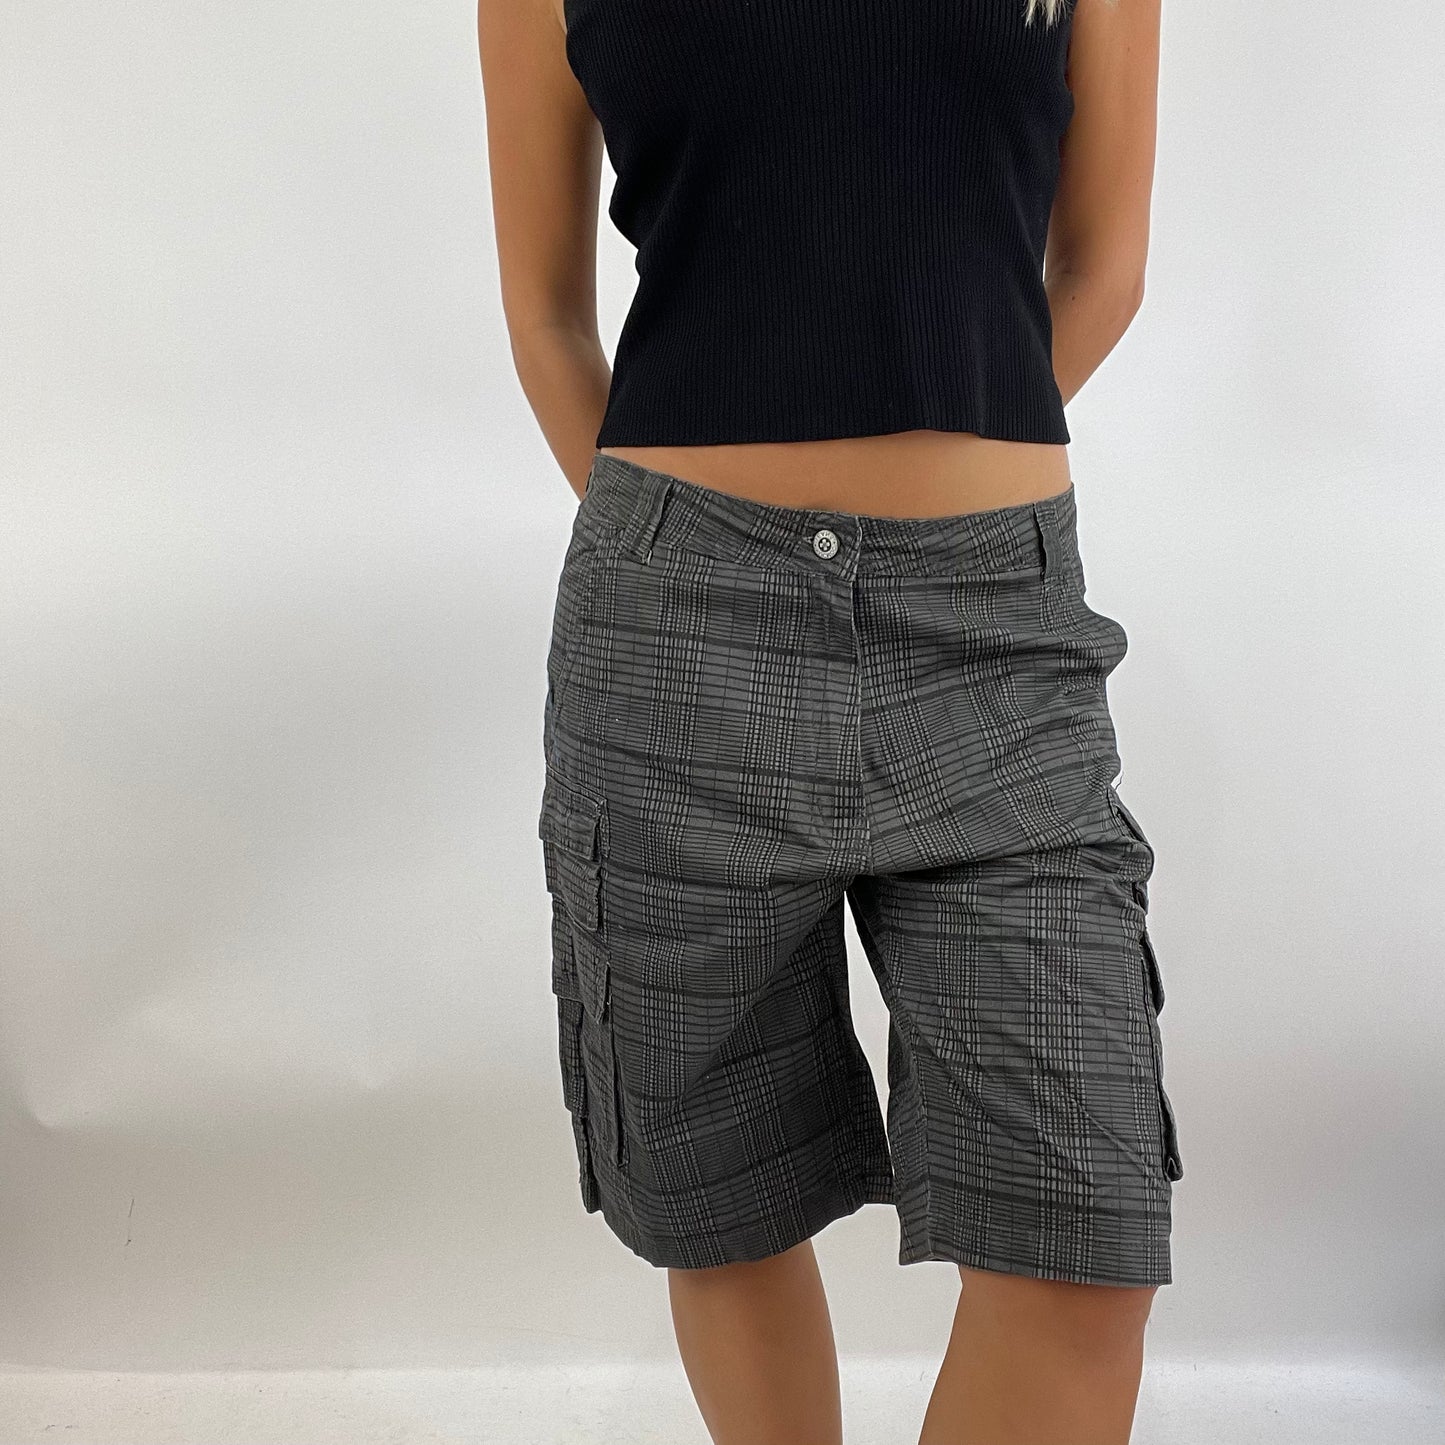 MODEL OFF DUTY DROP | small grey checked gingham shorts